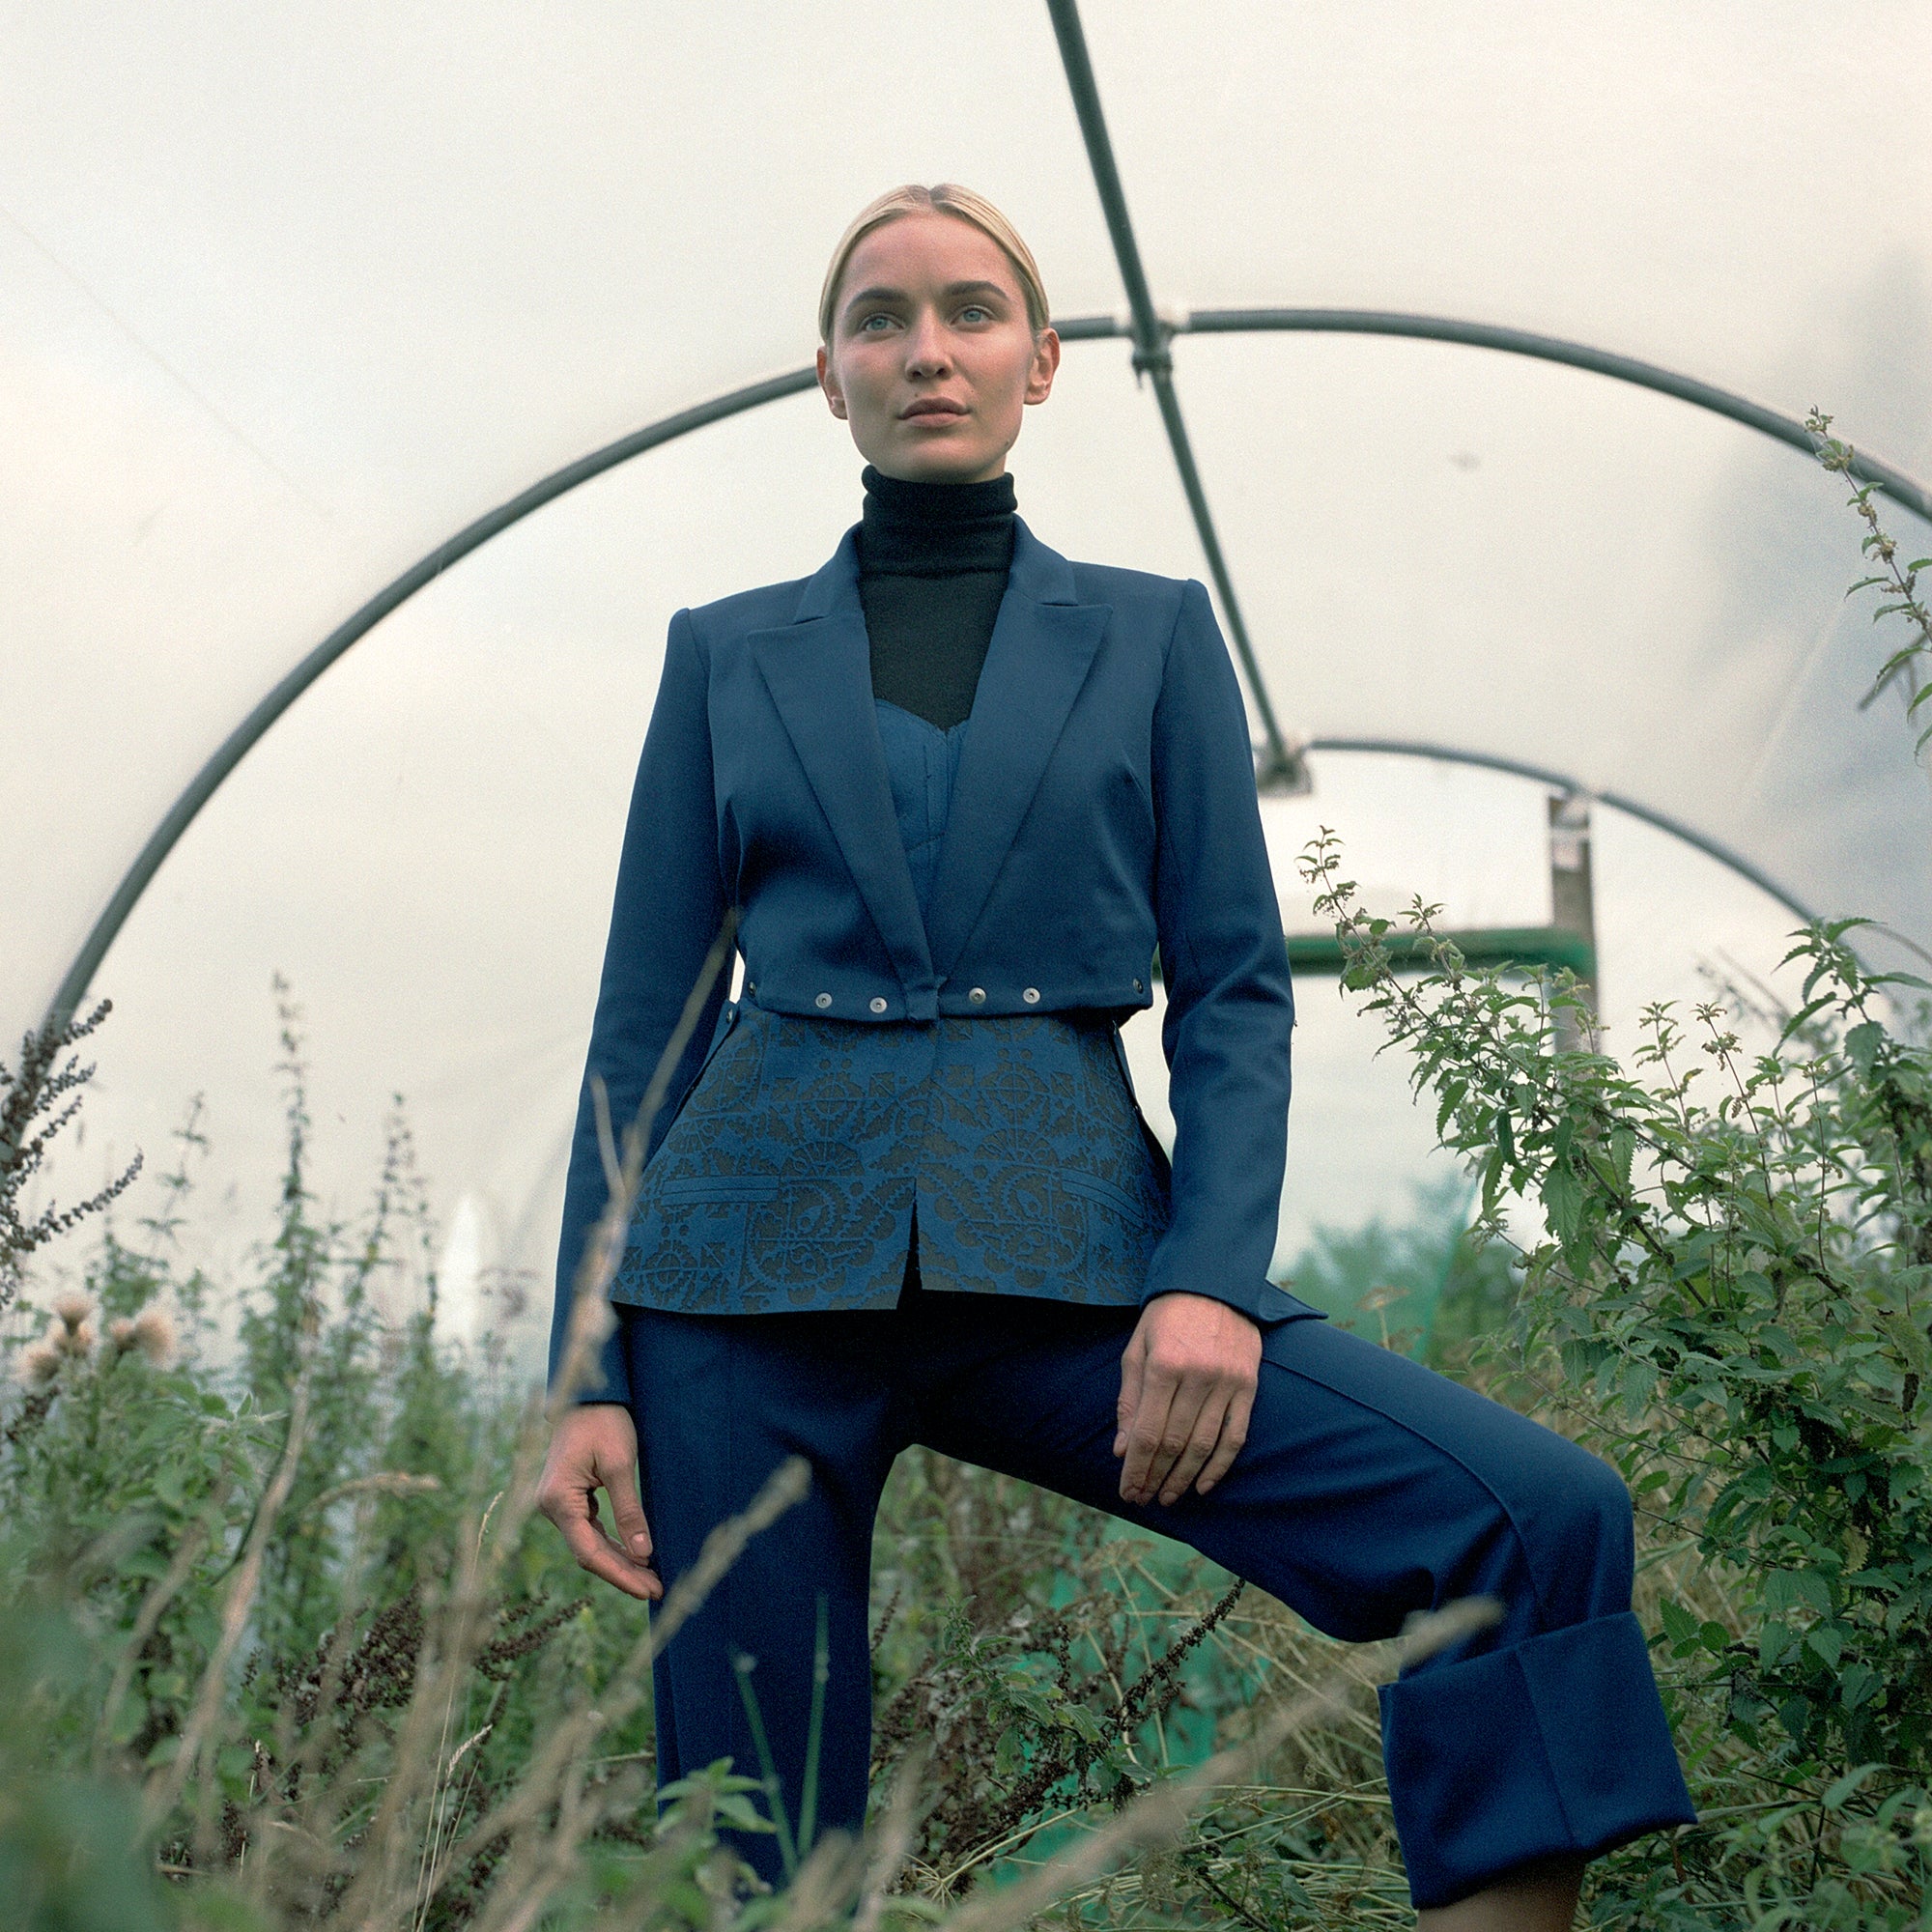 Popper jacket with laser cut peplum in blue luxury worsted wool & faux engraved suede